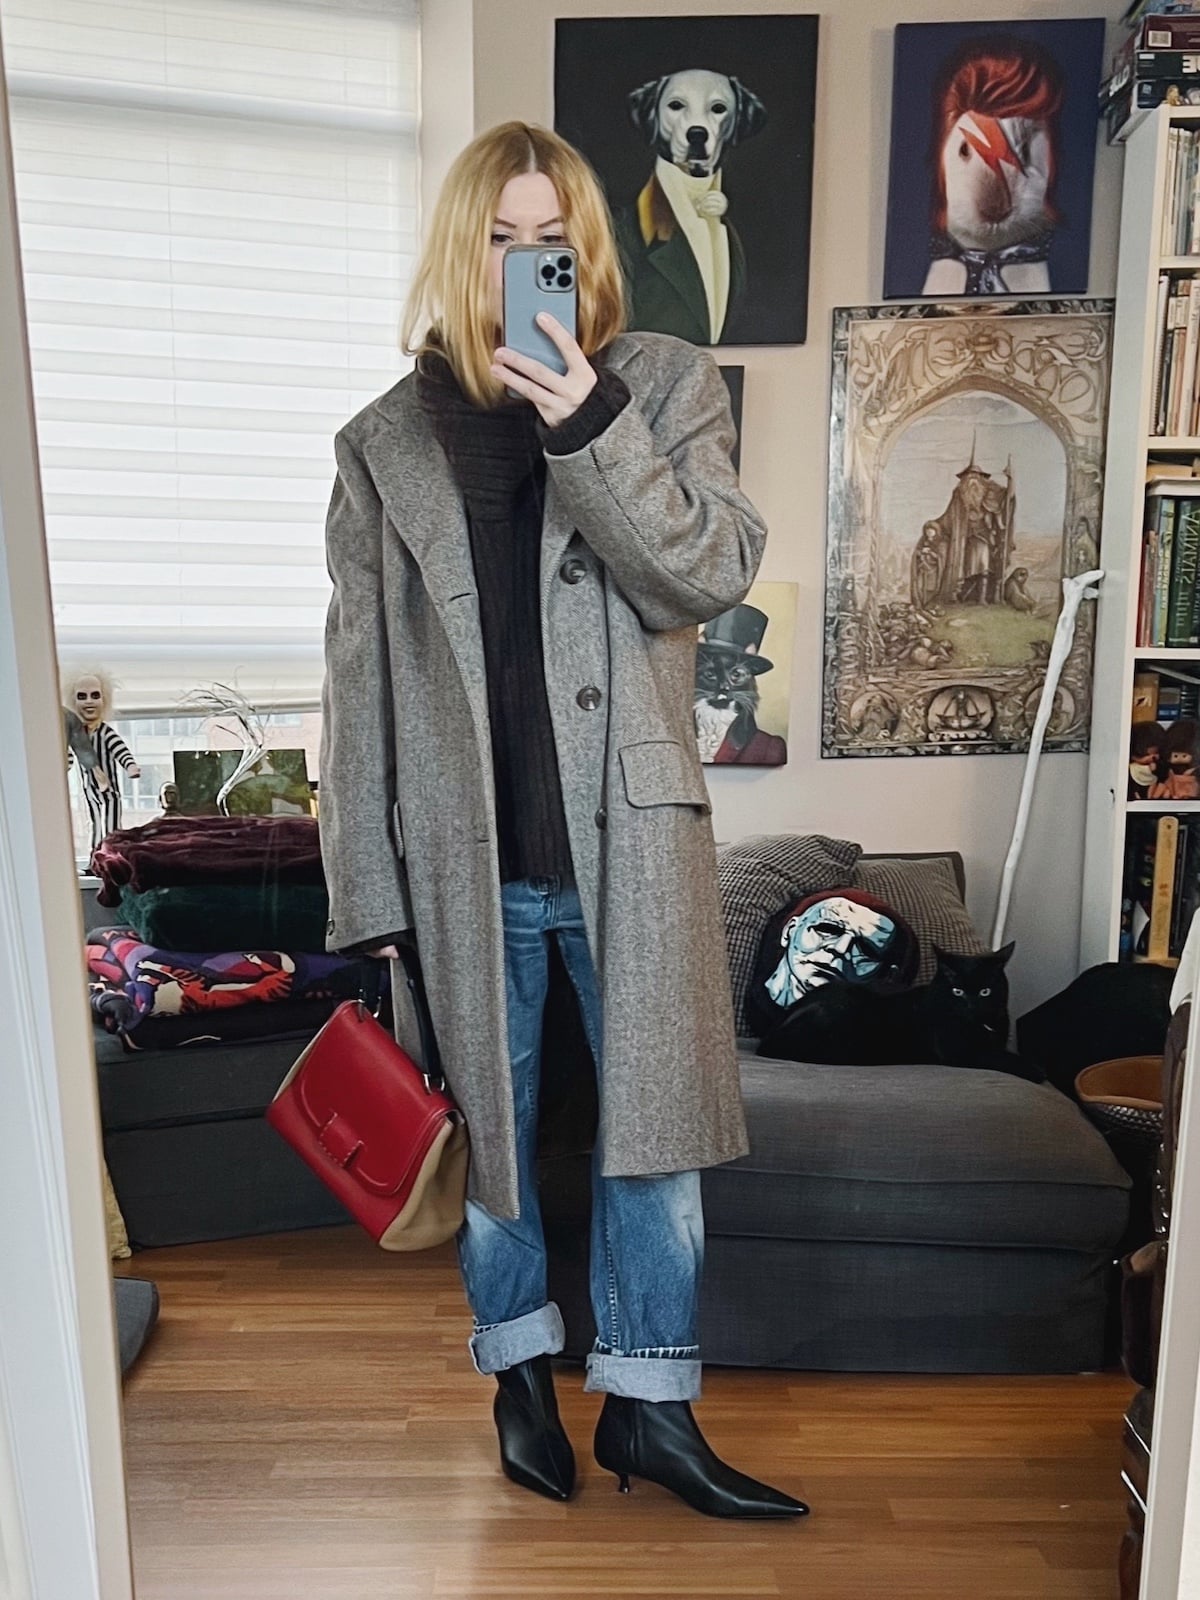 A blonde woman is wearing a brown sweater, vintage jeans, black boots, a men's vintage coat, and an old Fendi handbag.